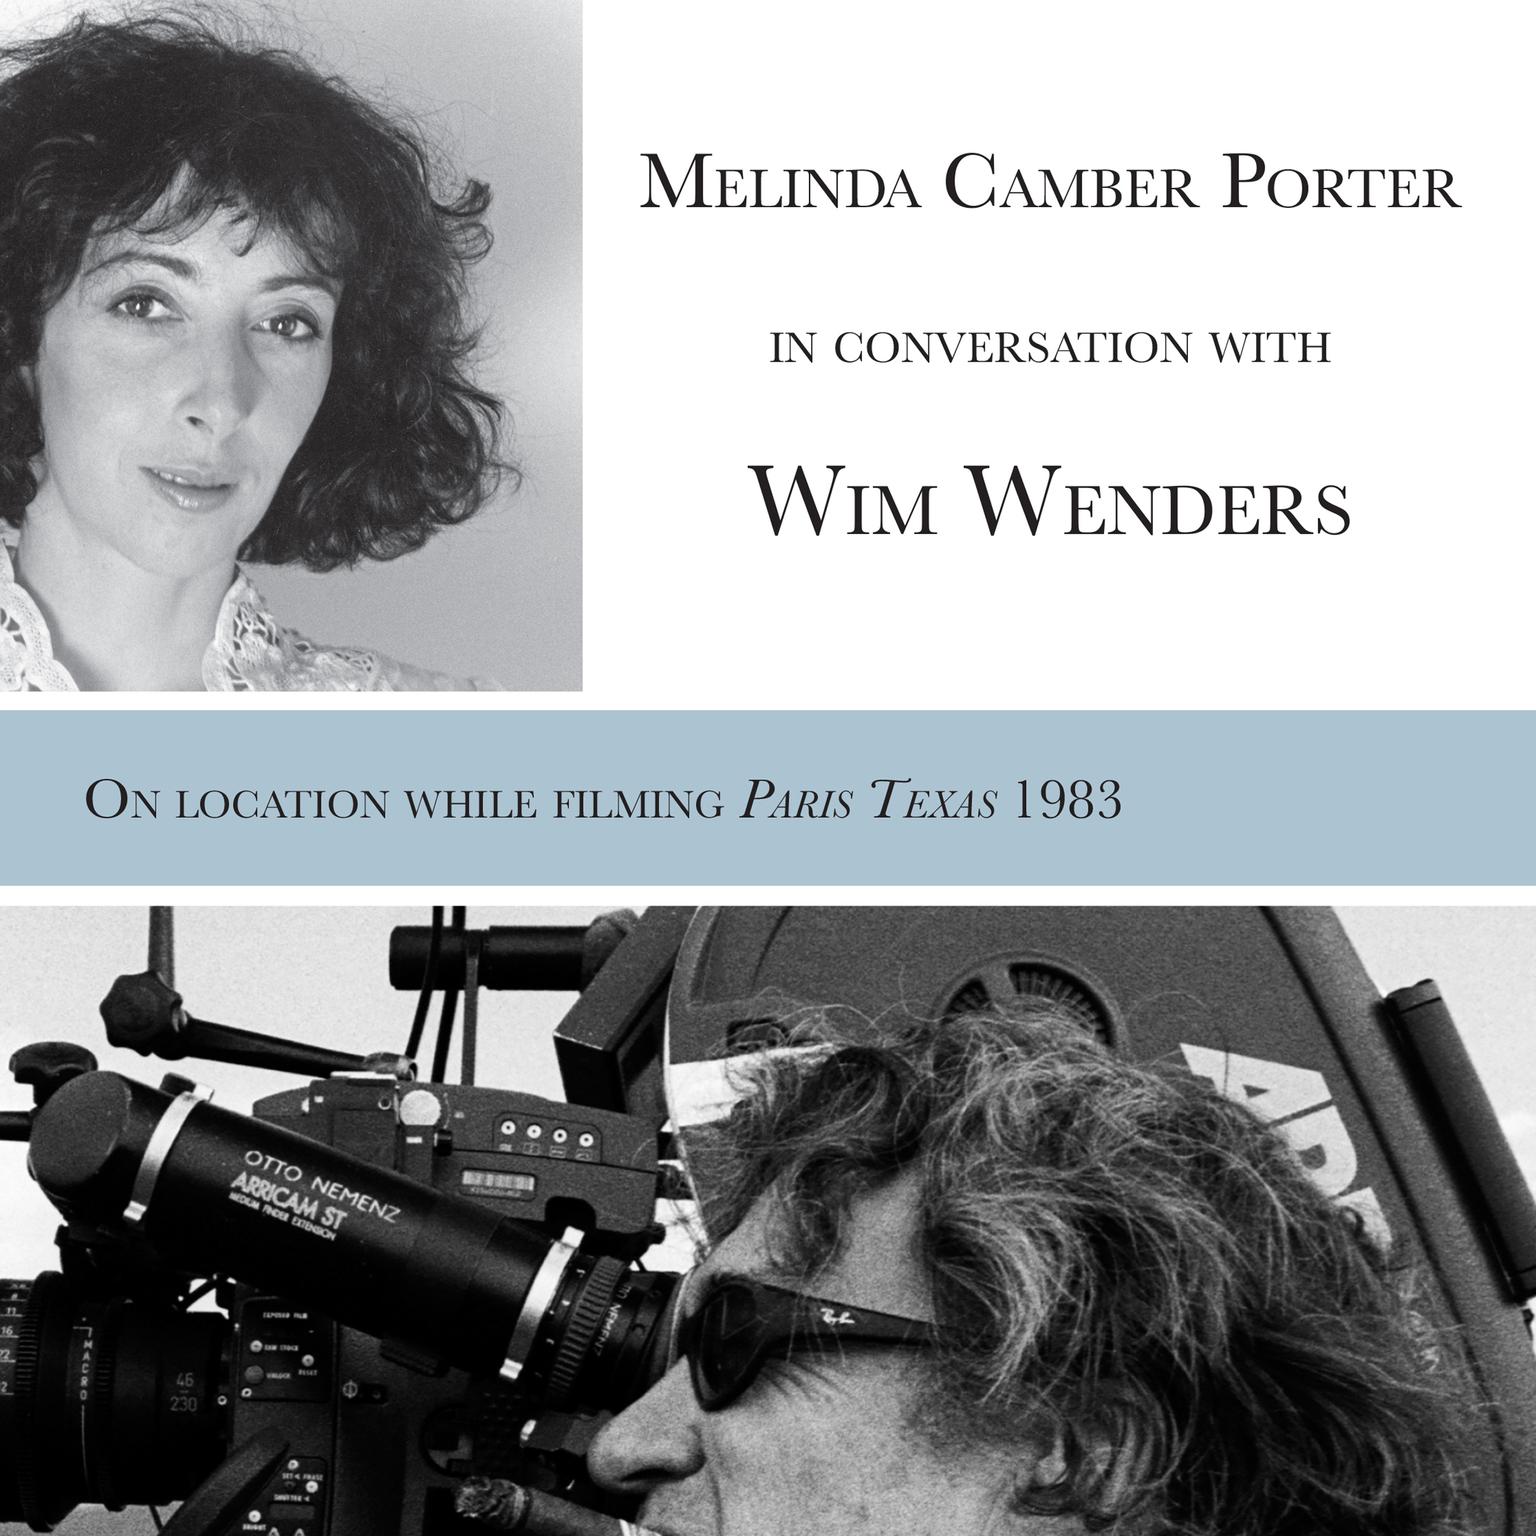 Melinda Camber Porter In Conversation With Wim Wenders, on the film set of Paris, Texas Audiobook, by Melinda Camber Porter